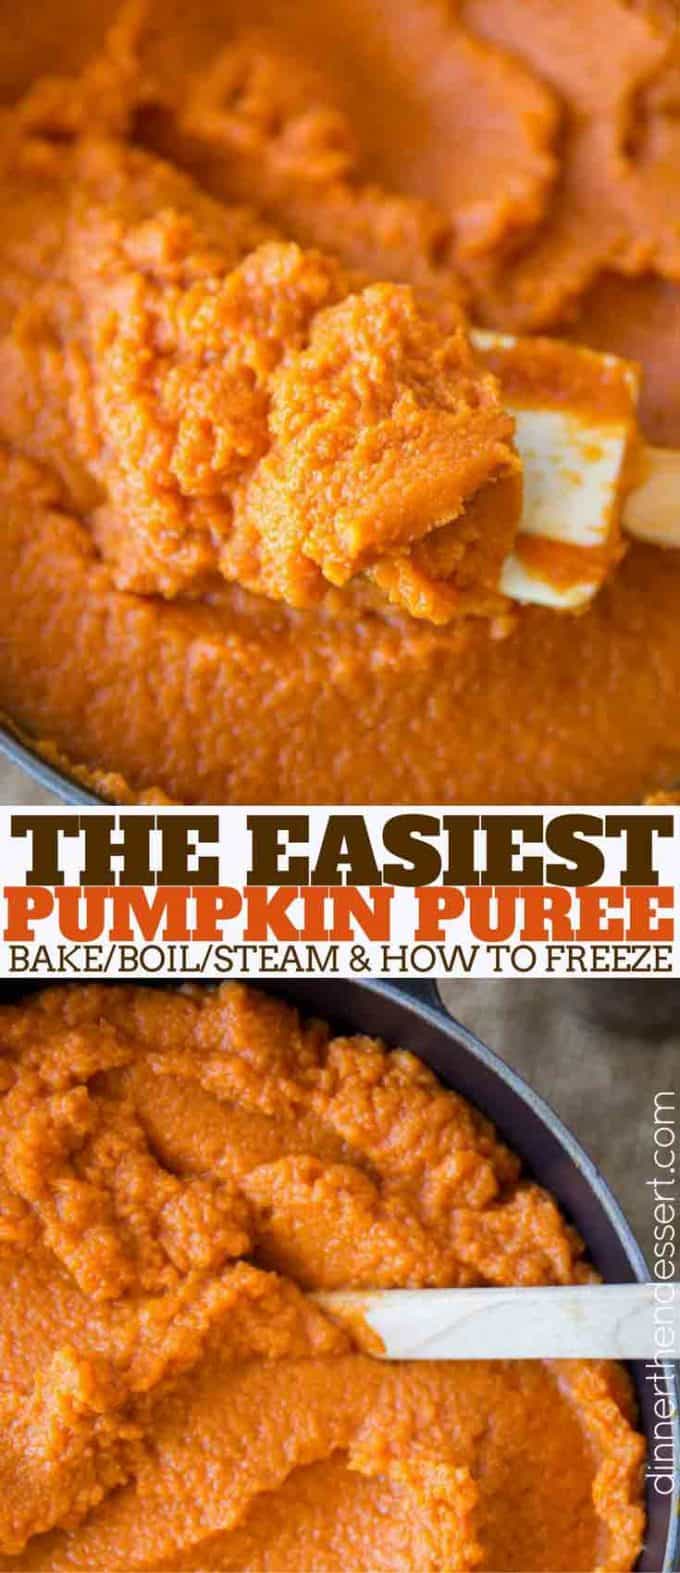 Homemade Pumpkin Puree is an easy way to use up all your Halloween pumpkins and it tastes so much better than canned pumpkin.